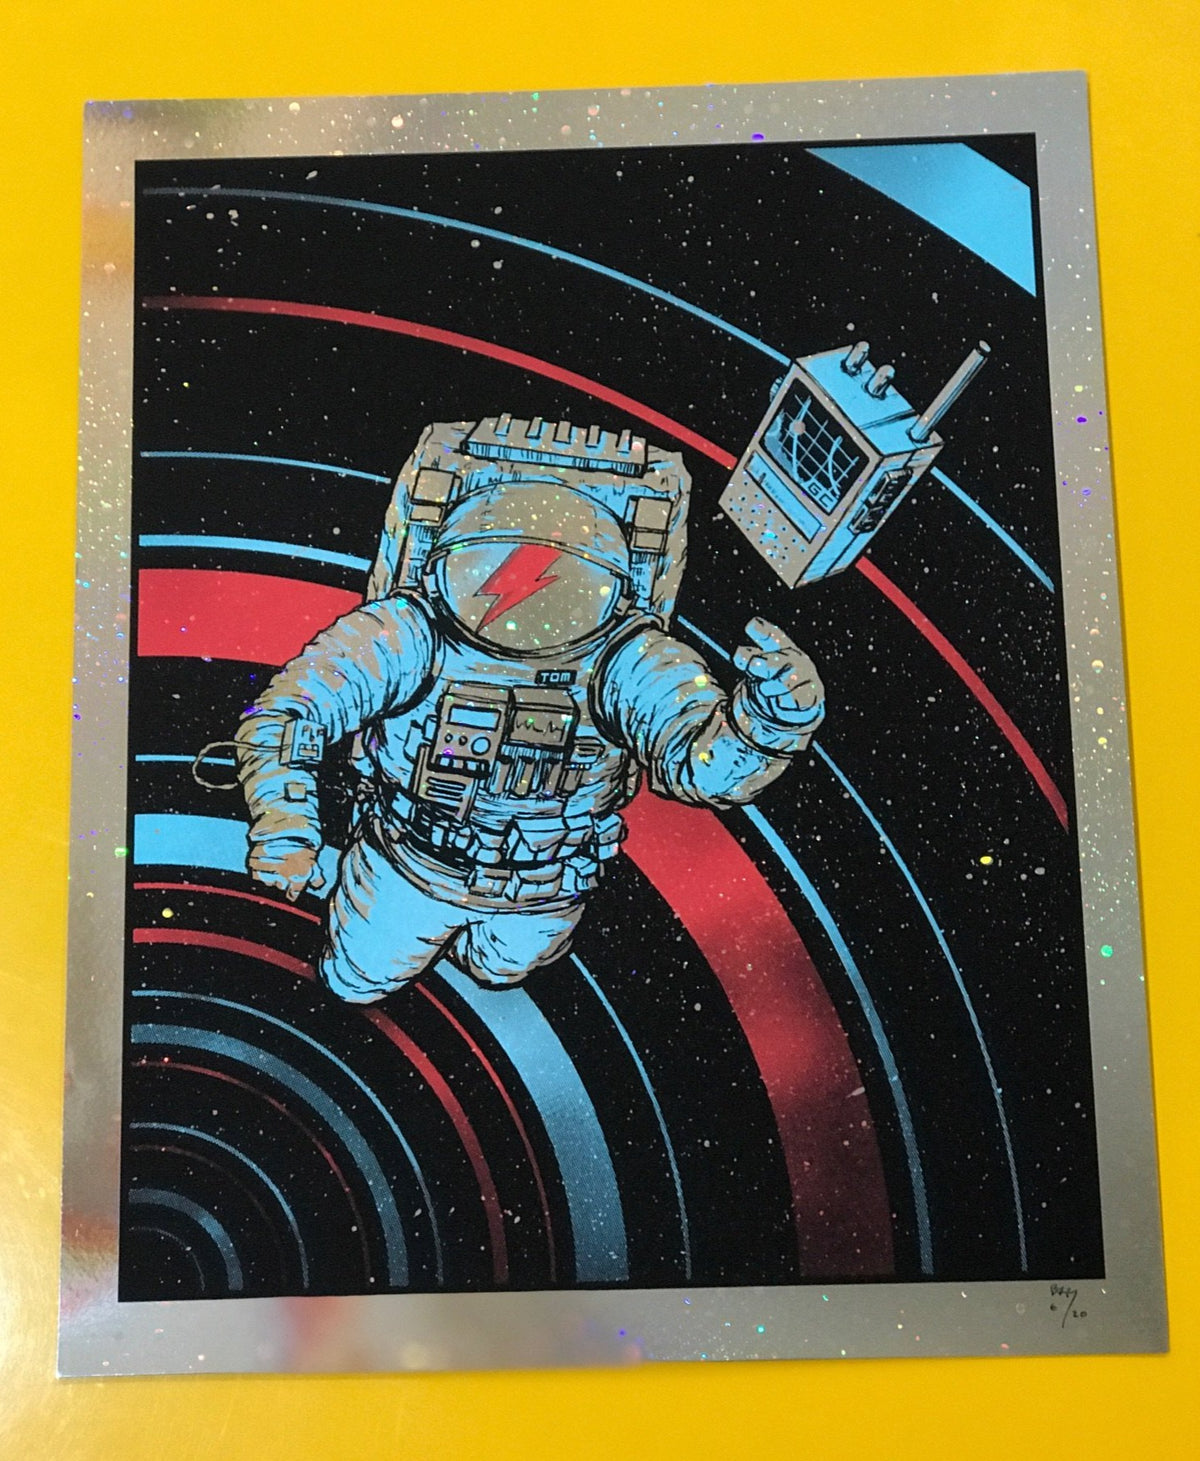 An astronaut screenprinted with holographic accents. The astronaut has a David Bowie red lightning bolt on the helmet. The astronaut is reaching out for a communication device. They are floating in space with red and blue circular lines surrounding them in the background.